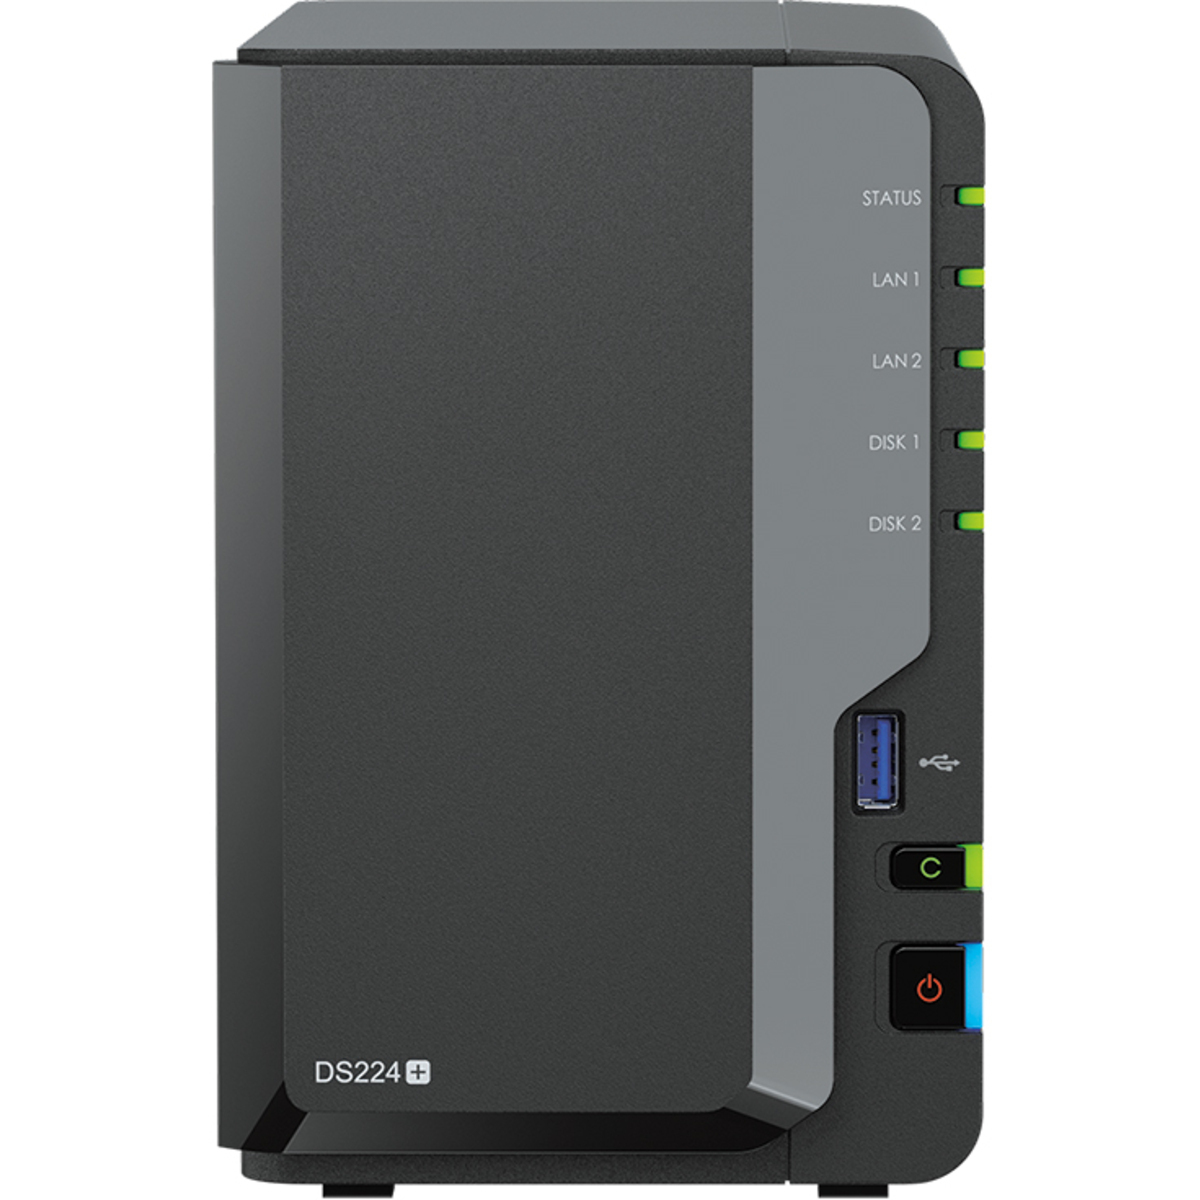 buy $496 Synology DiskStation DS224+ 8tb Desktop NAS - Network Attached Storage Device 2x4000gb Toshiba MN Series MN08ADA400E 3.5 7200rpm SATA 6Gb/s HDD NAS Class Drives Installed - Burn-In Tested - ON SALE - FREE RAM UPGRADE - nas headquarters buy network attached storage server device das new raid-5 free shipping simply usa DiskStation DS224+